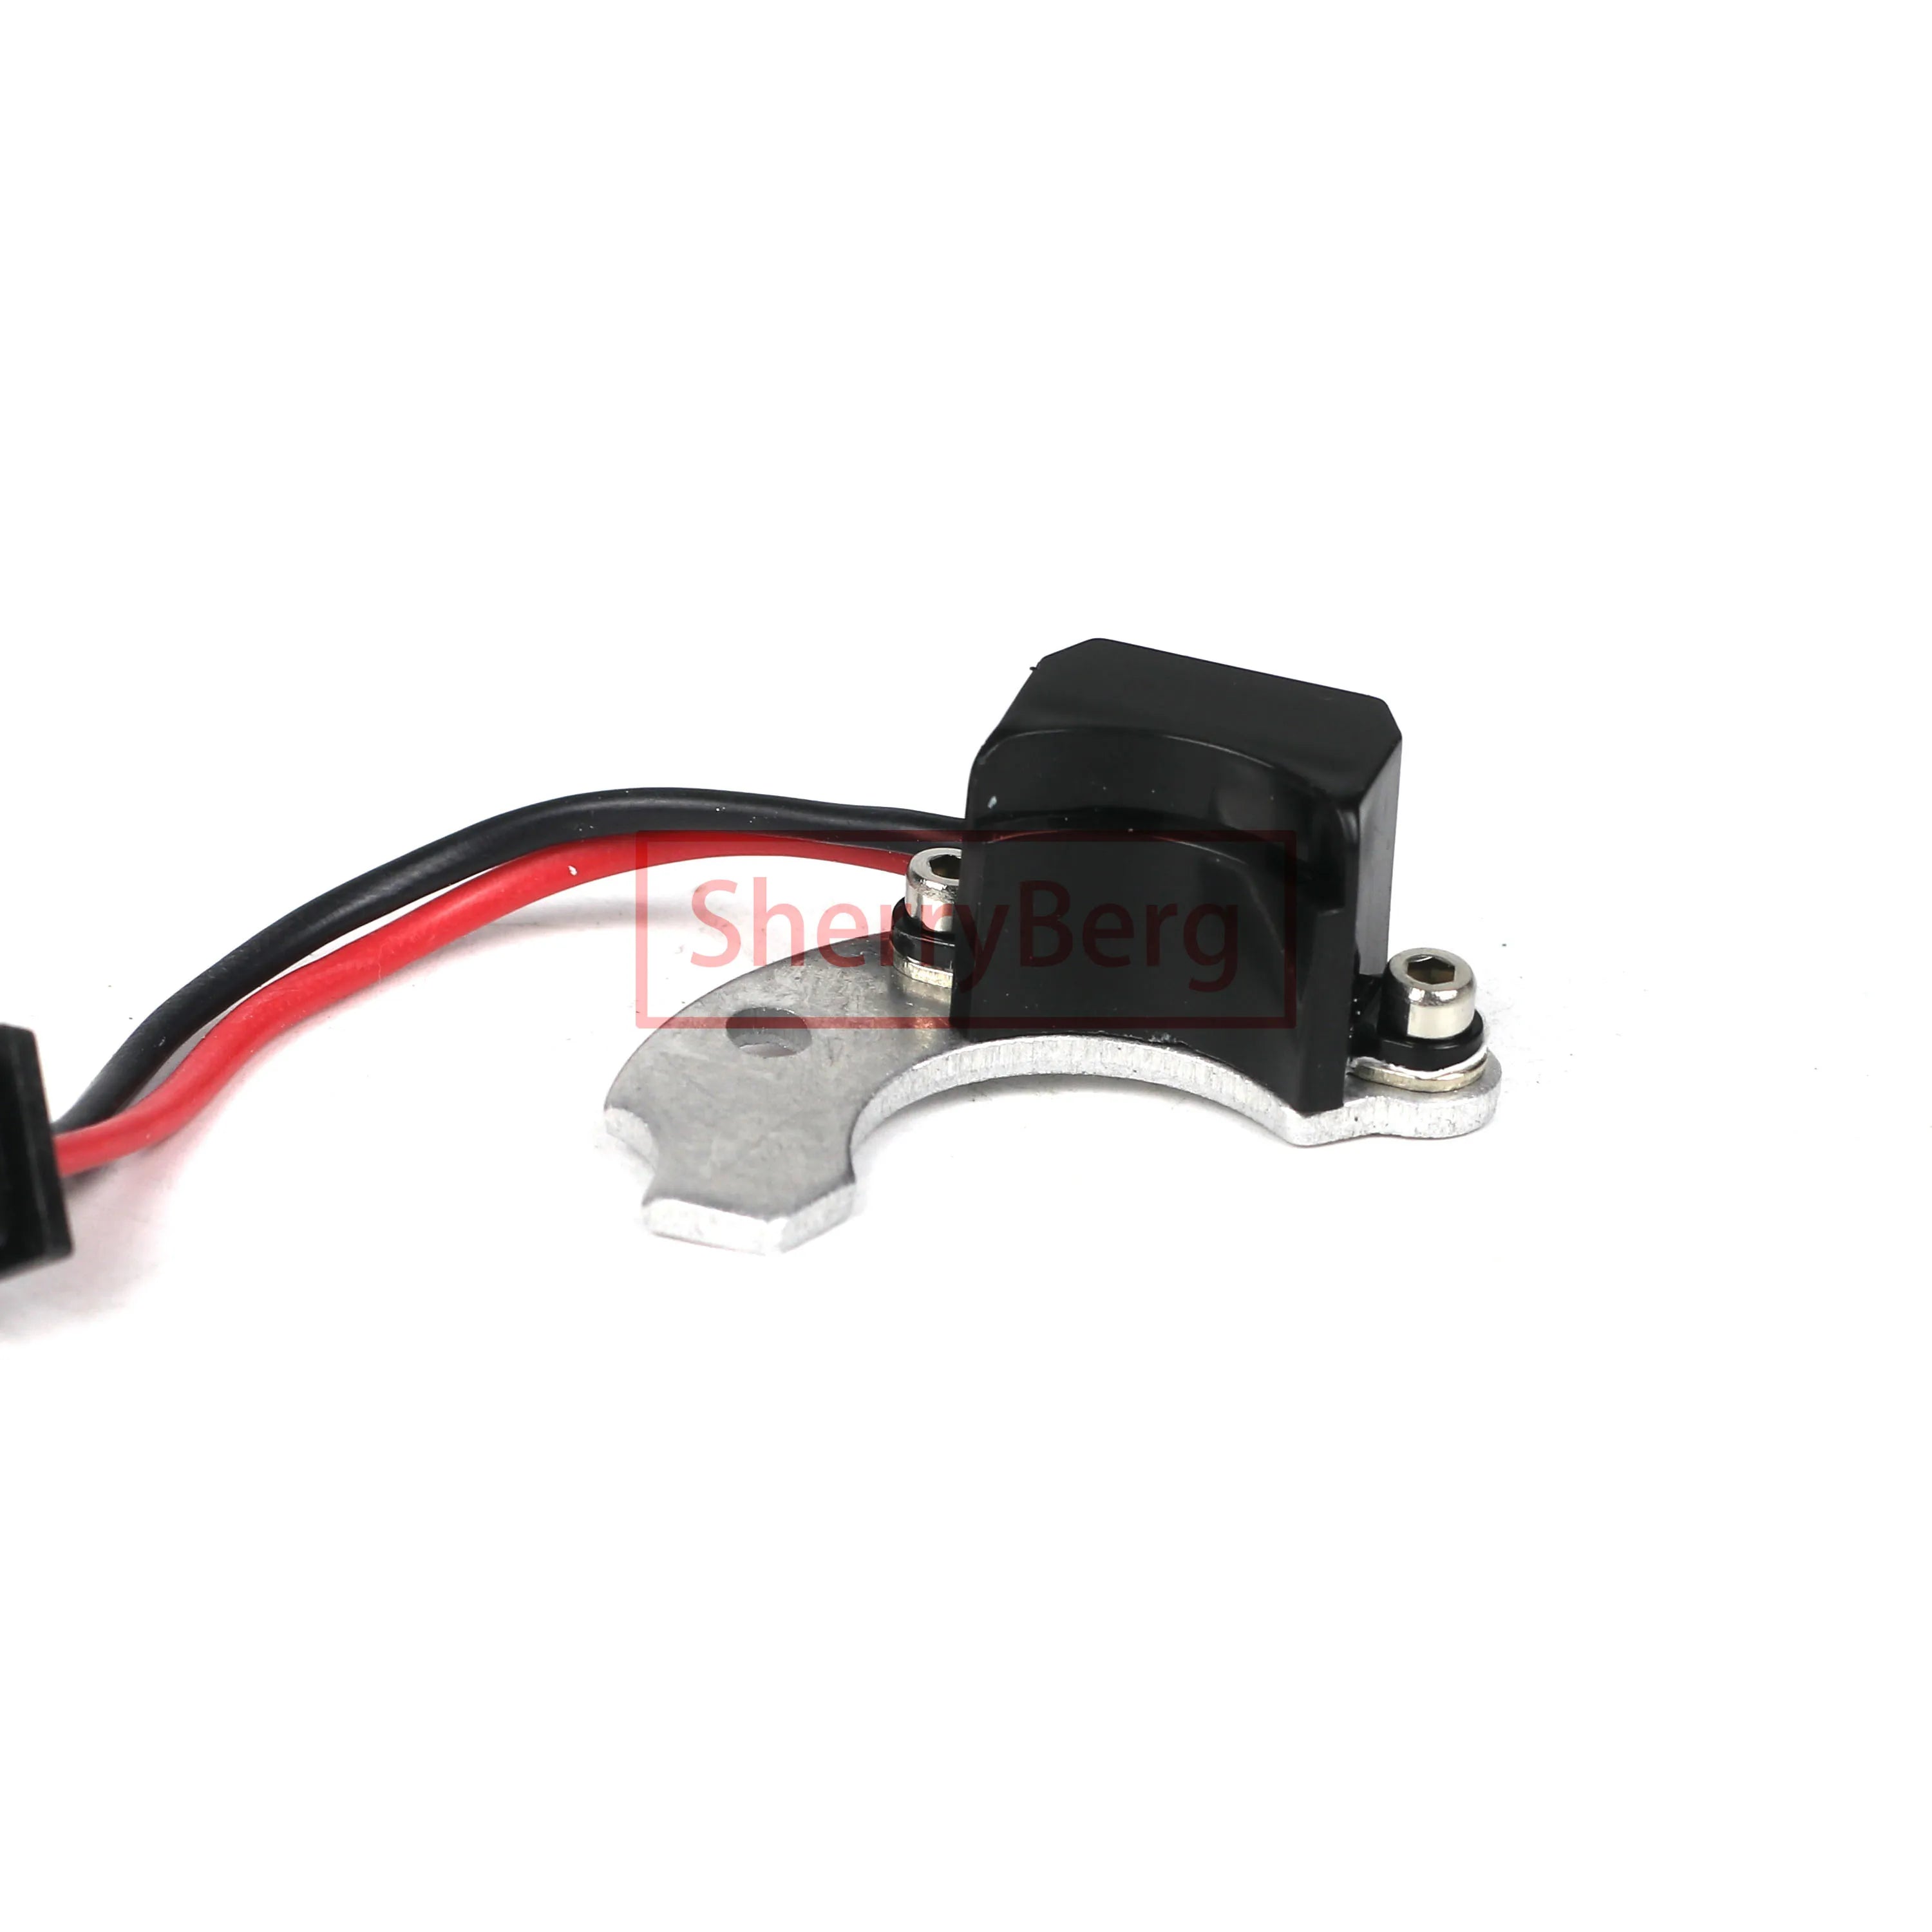 SherryBerg Distributor Electronic IGNITION SET Electrical Ignition Kit for Bosch 009, 050 Distributors 3BOS4U1 FOR VW Bug...New